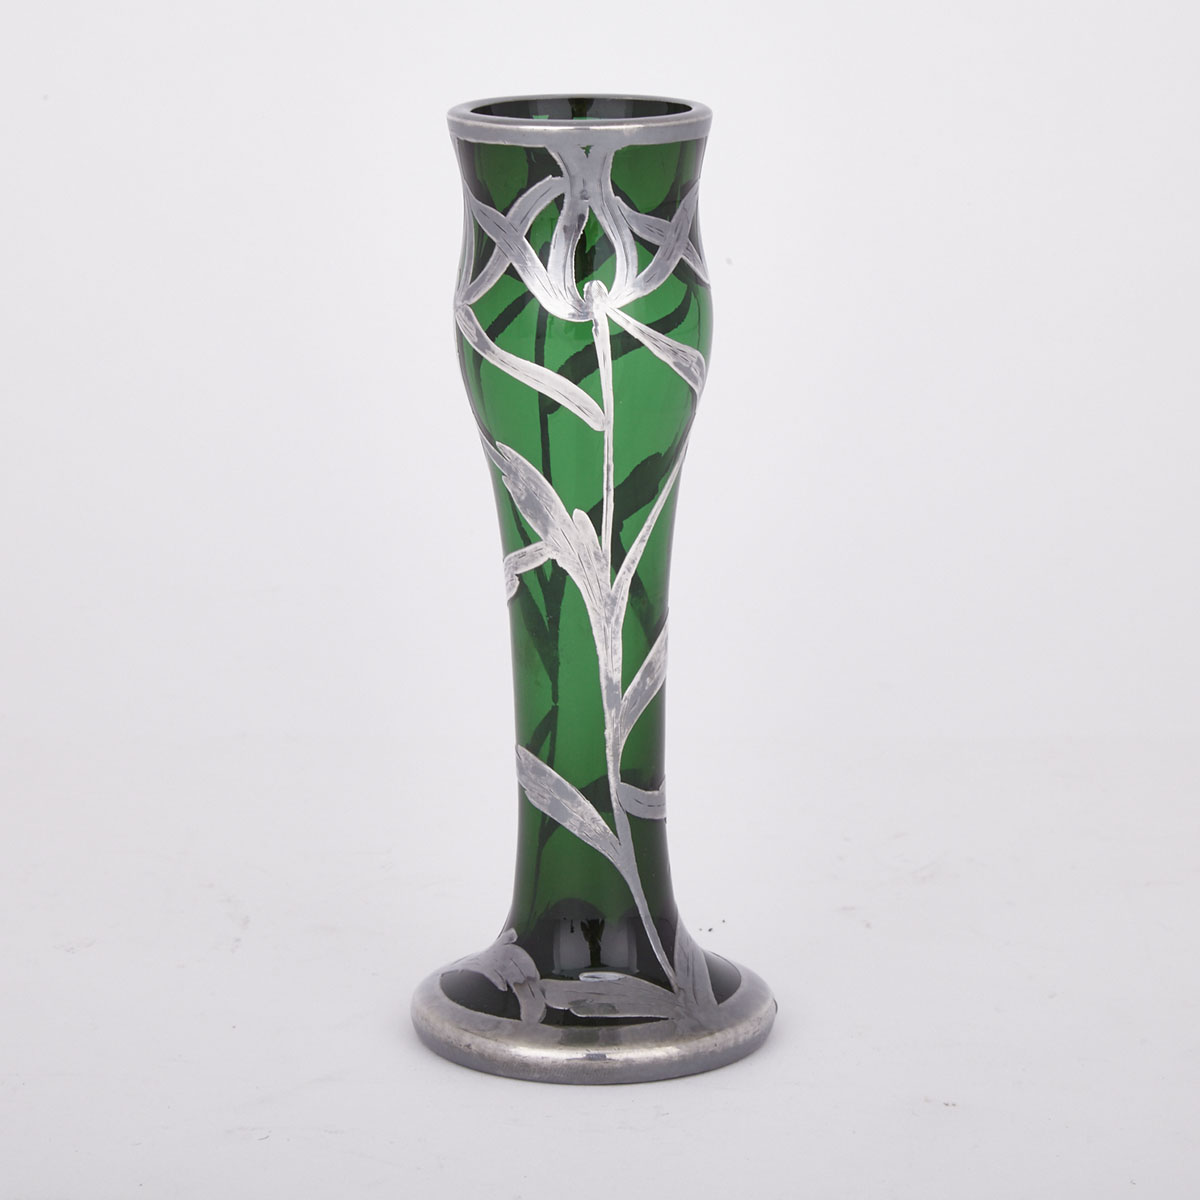 American Silver Overlaid Green Glass Vase, early 20th century